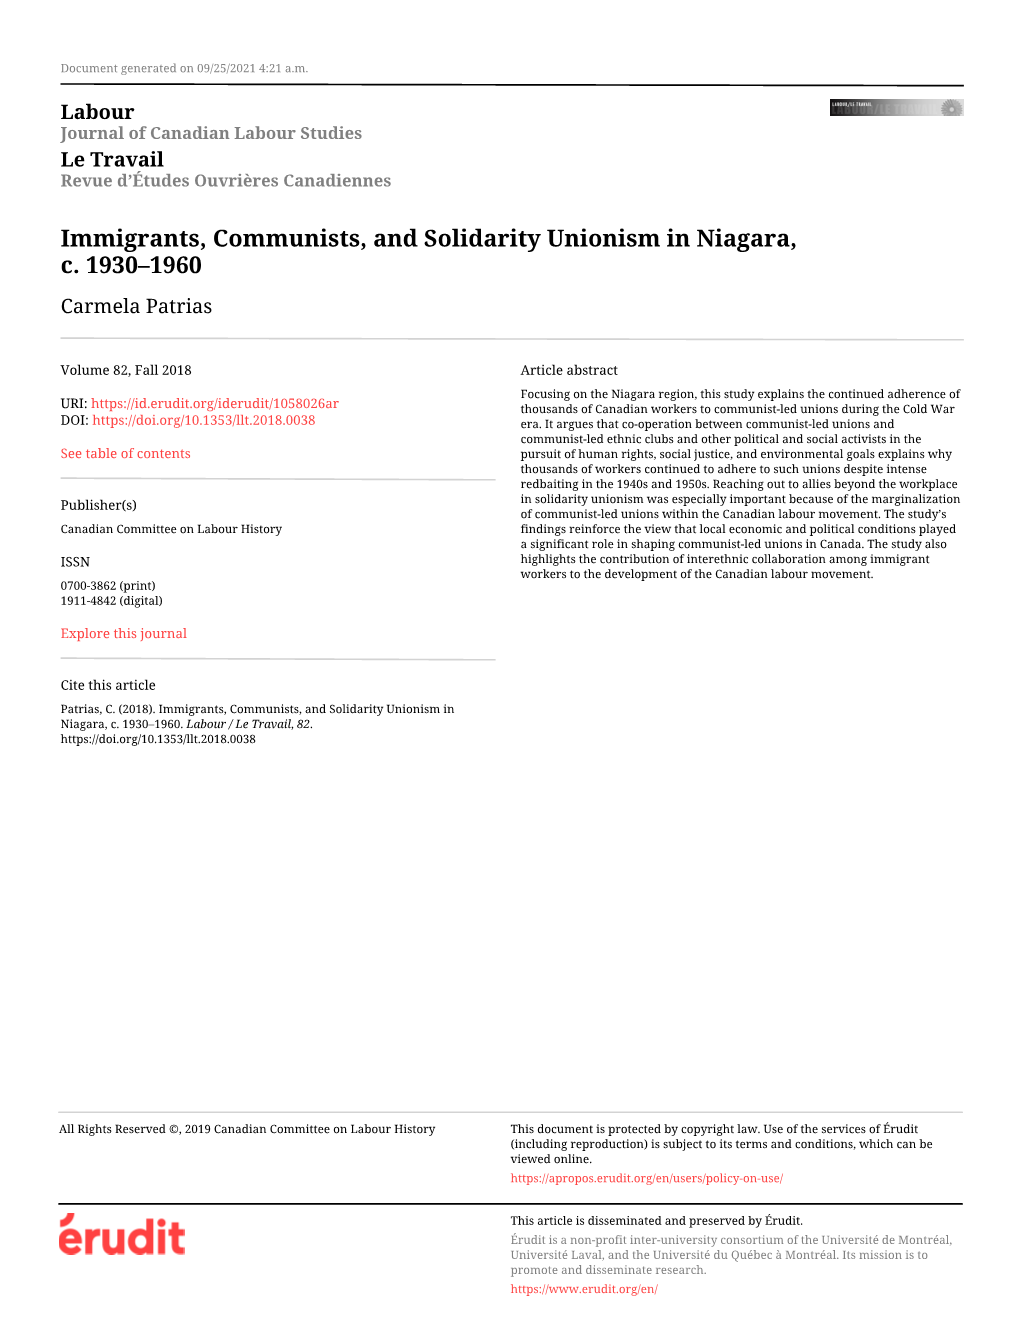 Immigrants, Communists, and Solidarity Unionism in Niagara, C